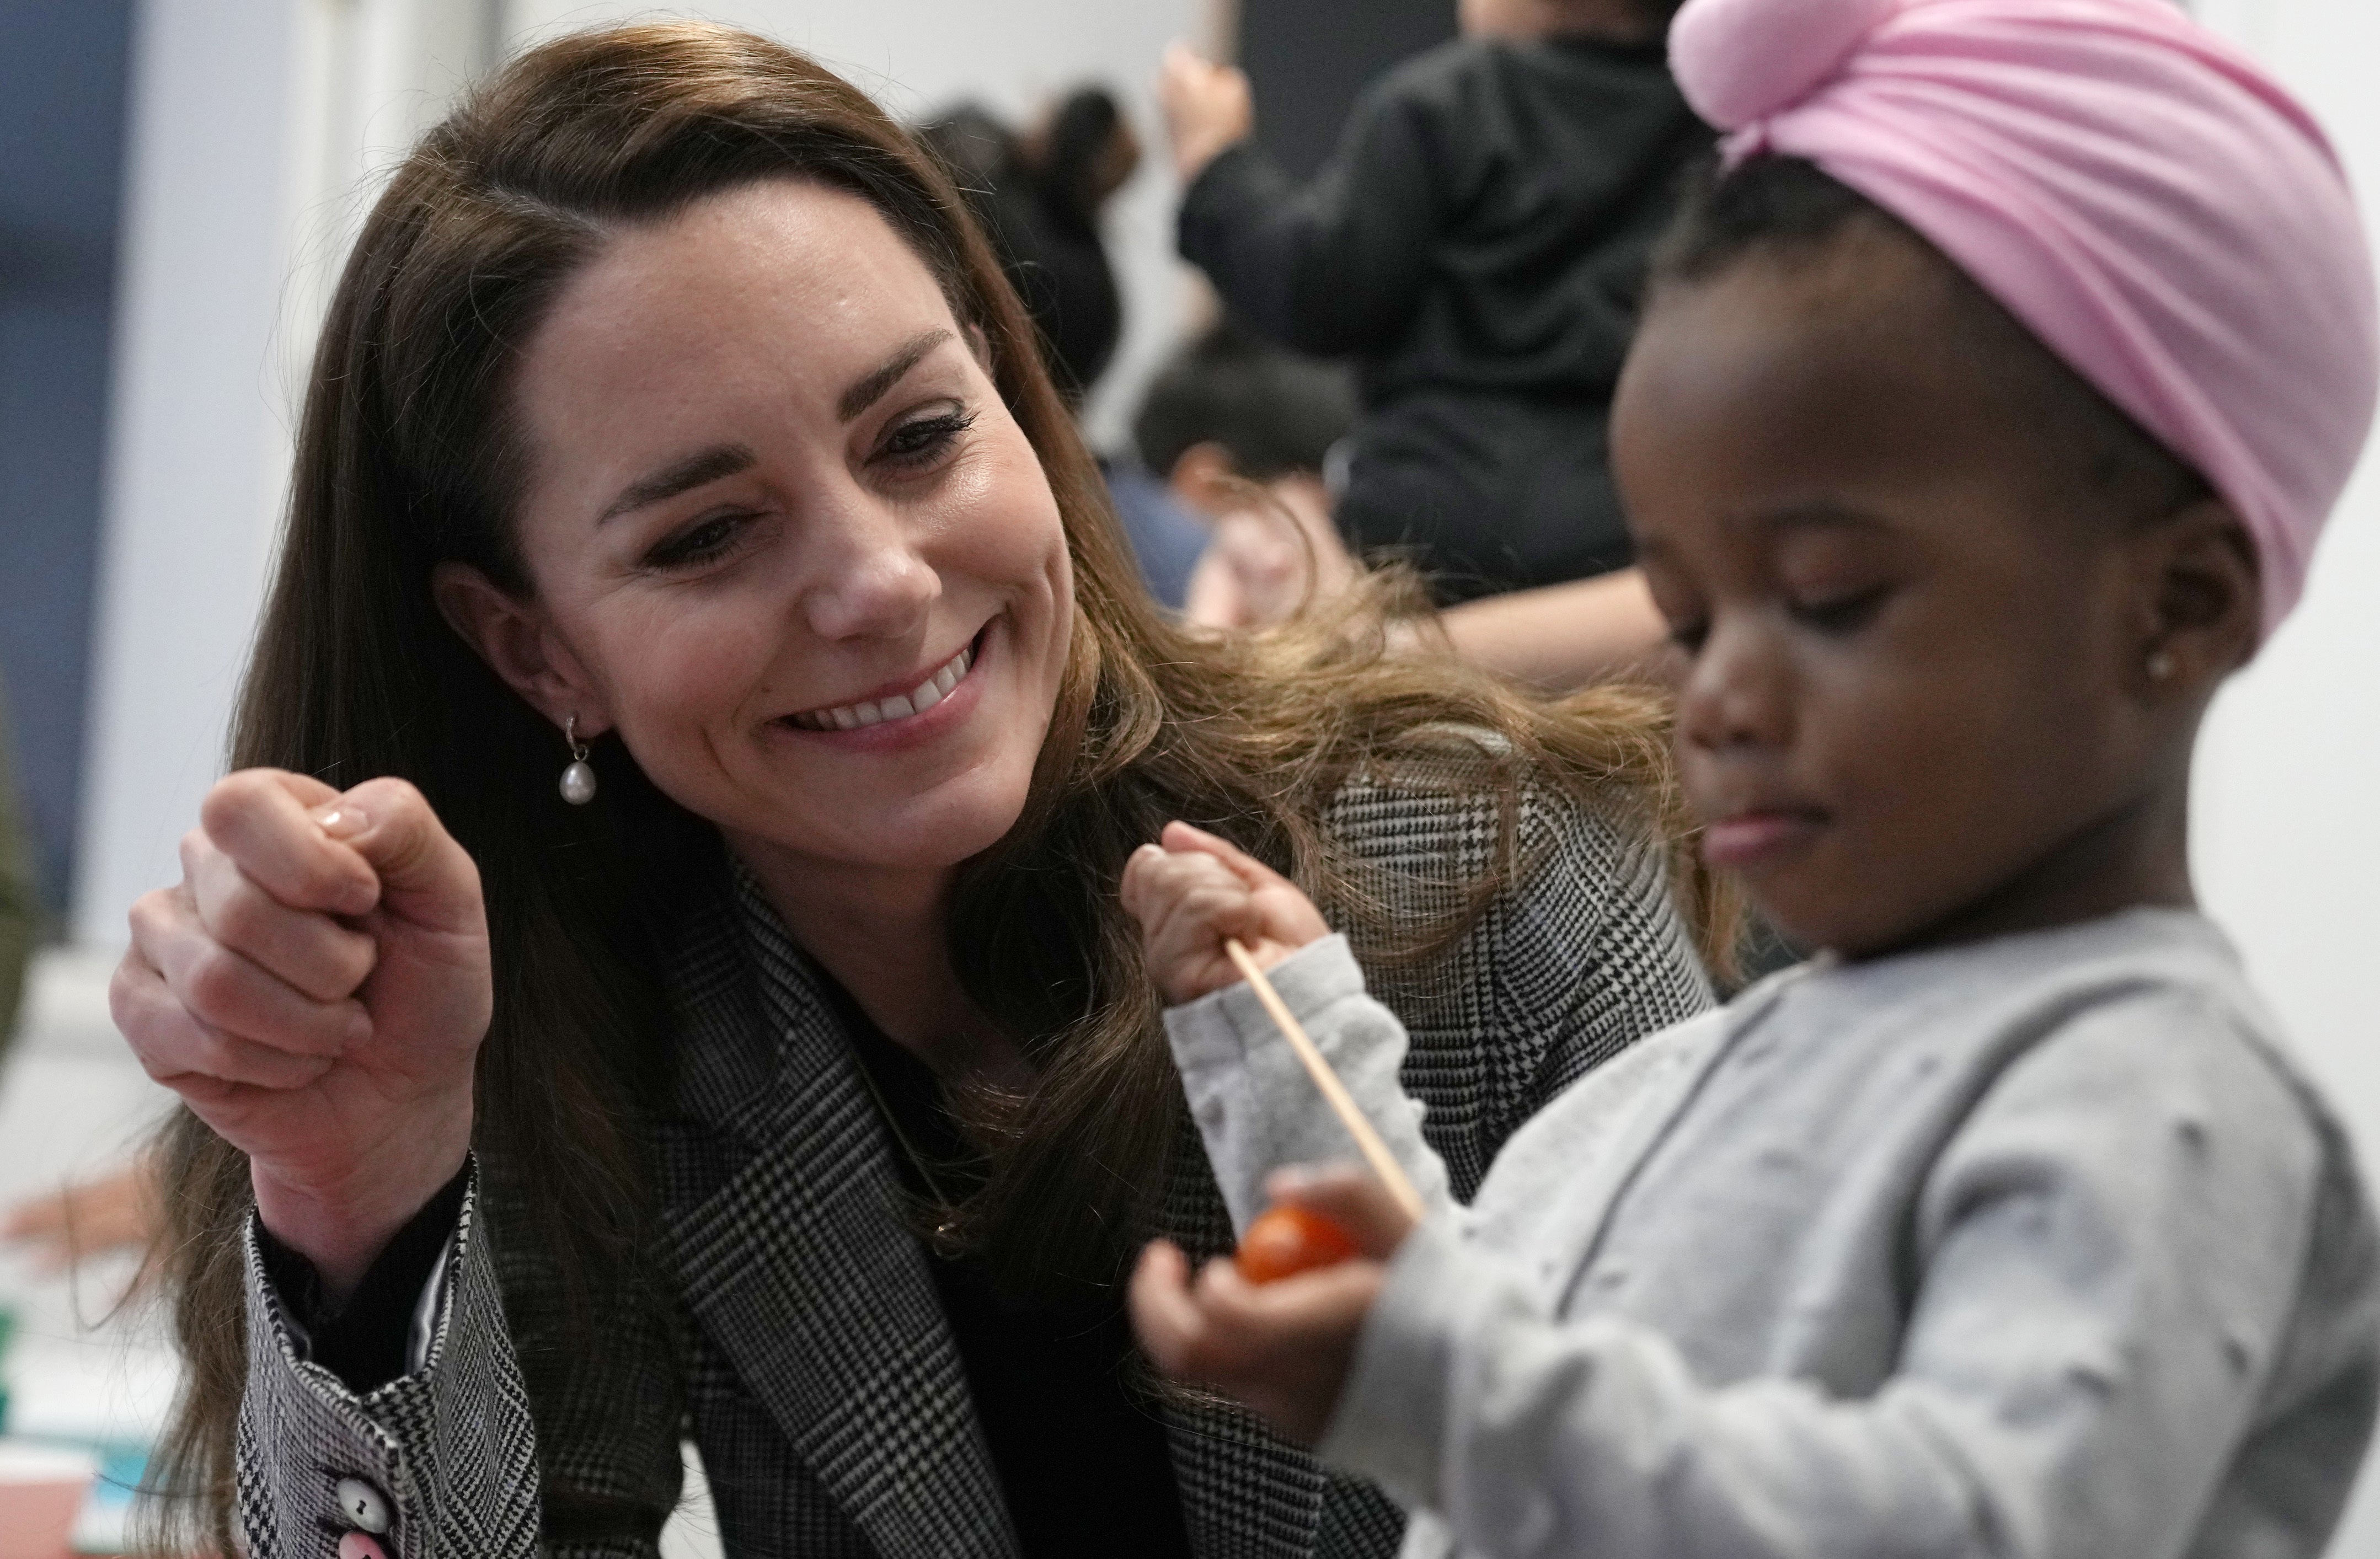 The Duchess of Cambridge during a visit to PACT (Parents and Communities Together) in Southwark (Alastair Grant/PA)